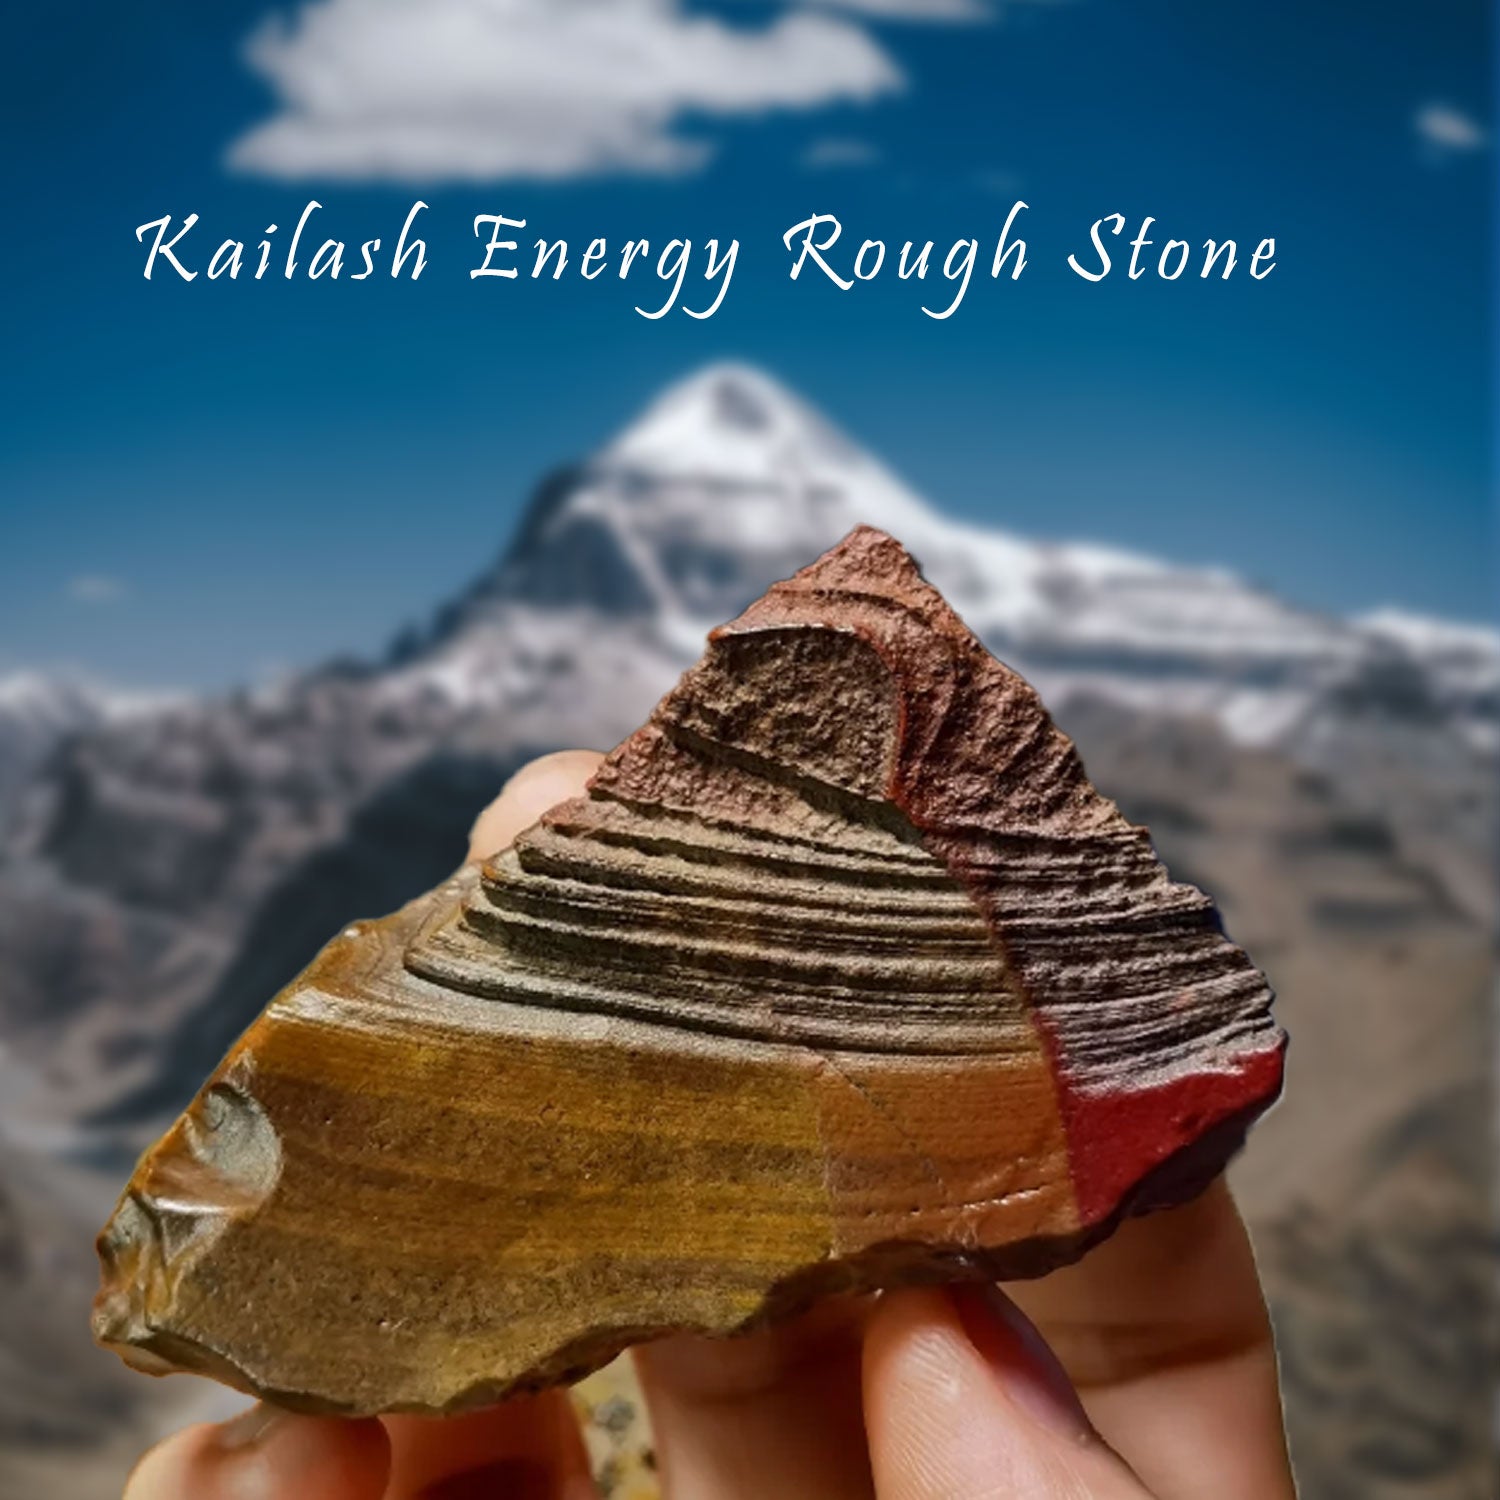 Energy blessing stone from Kailash